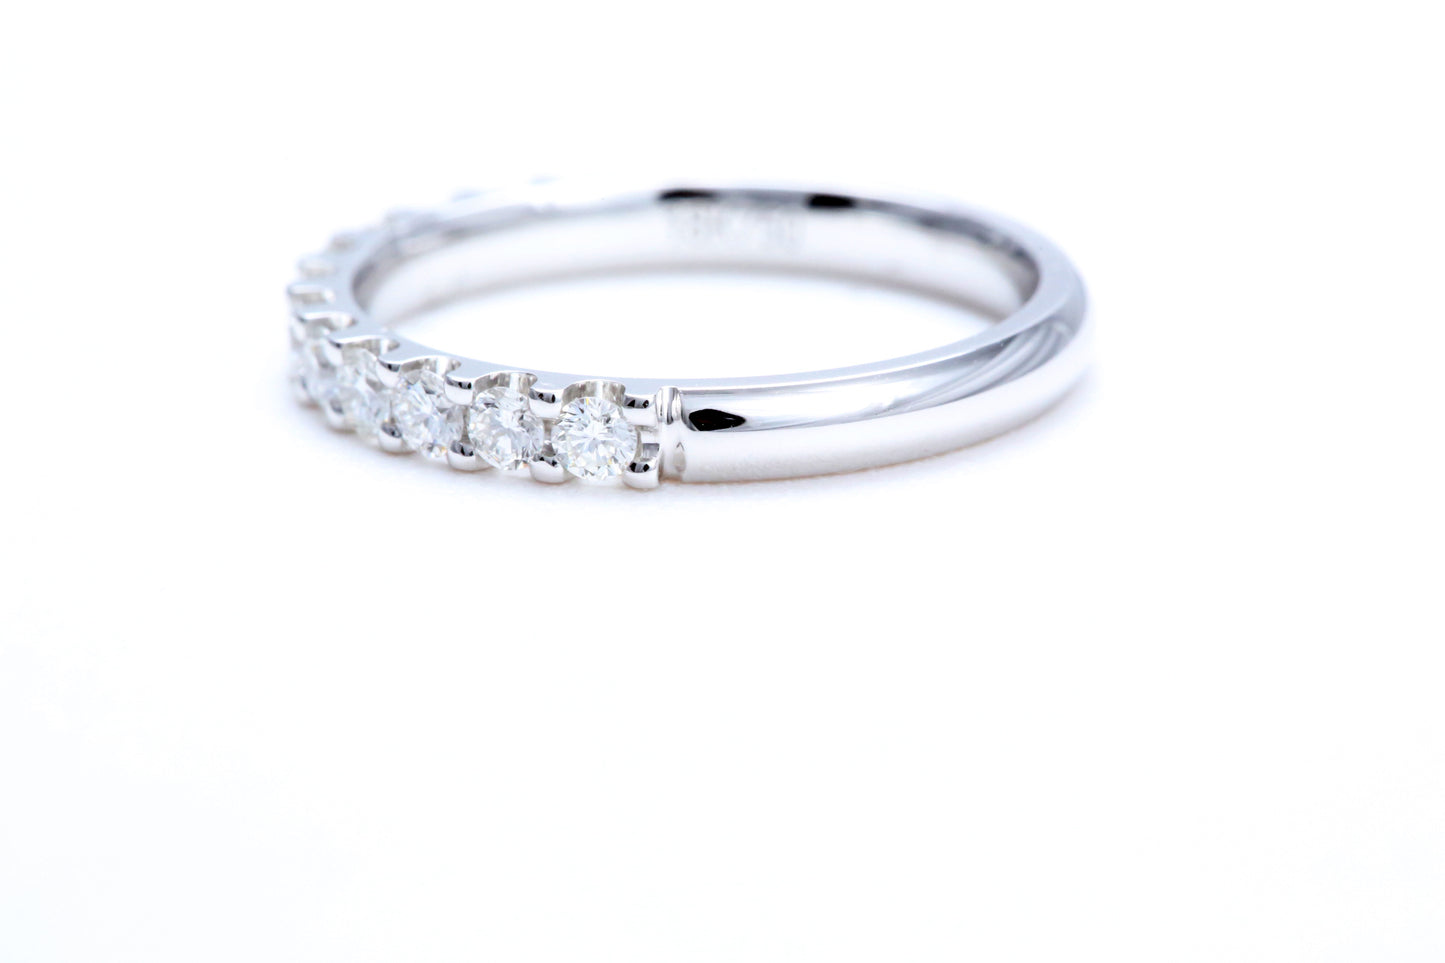 Minimalist Pavé Diamond Ring 1/2 of a carat total weight in 14K white gold